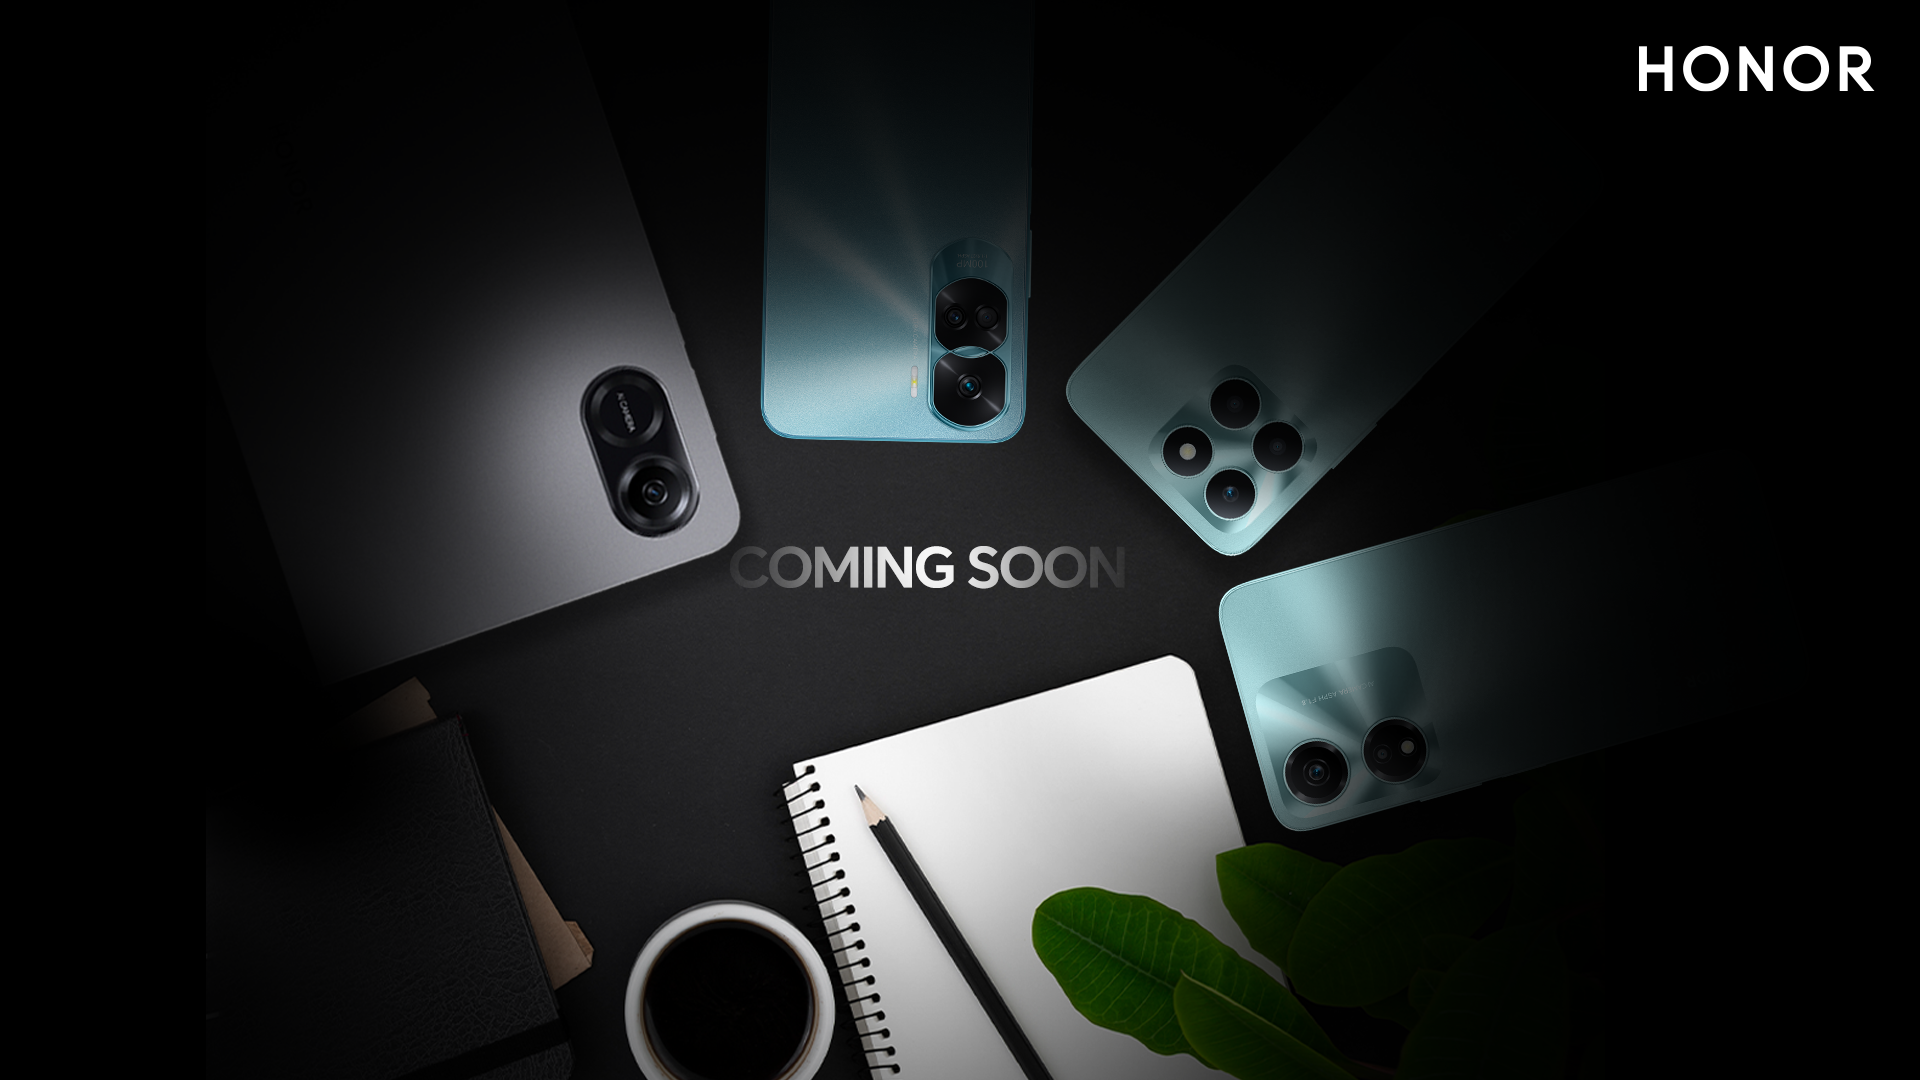 HONOR to Launch an Impressive Lineup of Budget-friendly Smart Devices this September 26